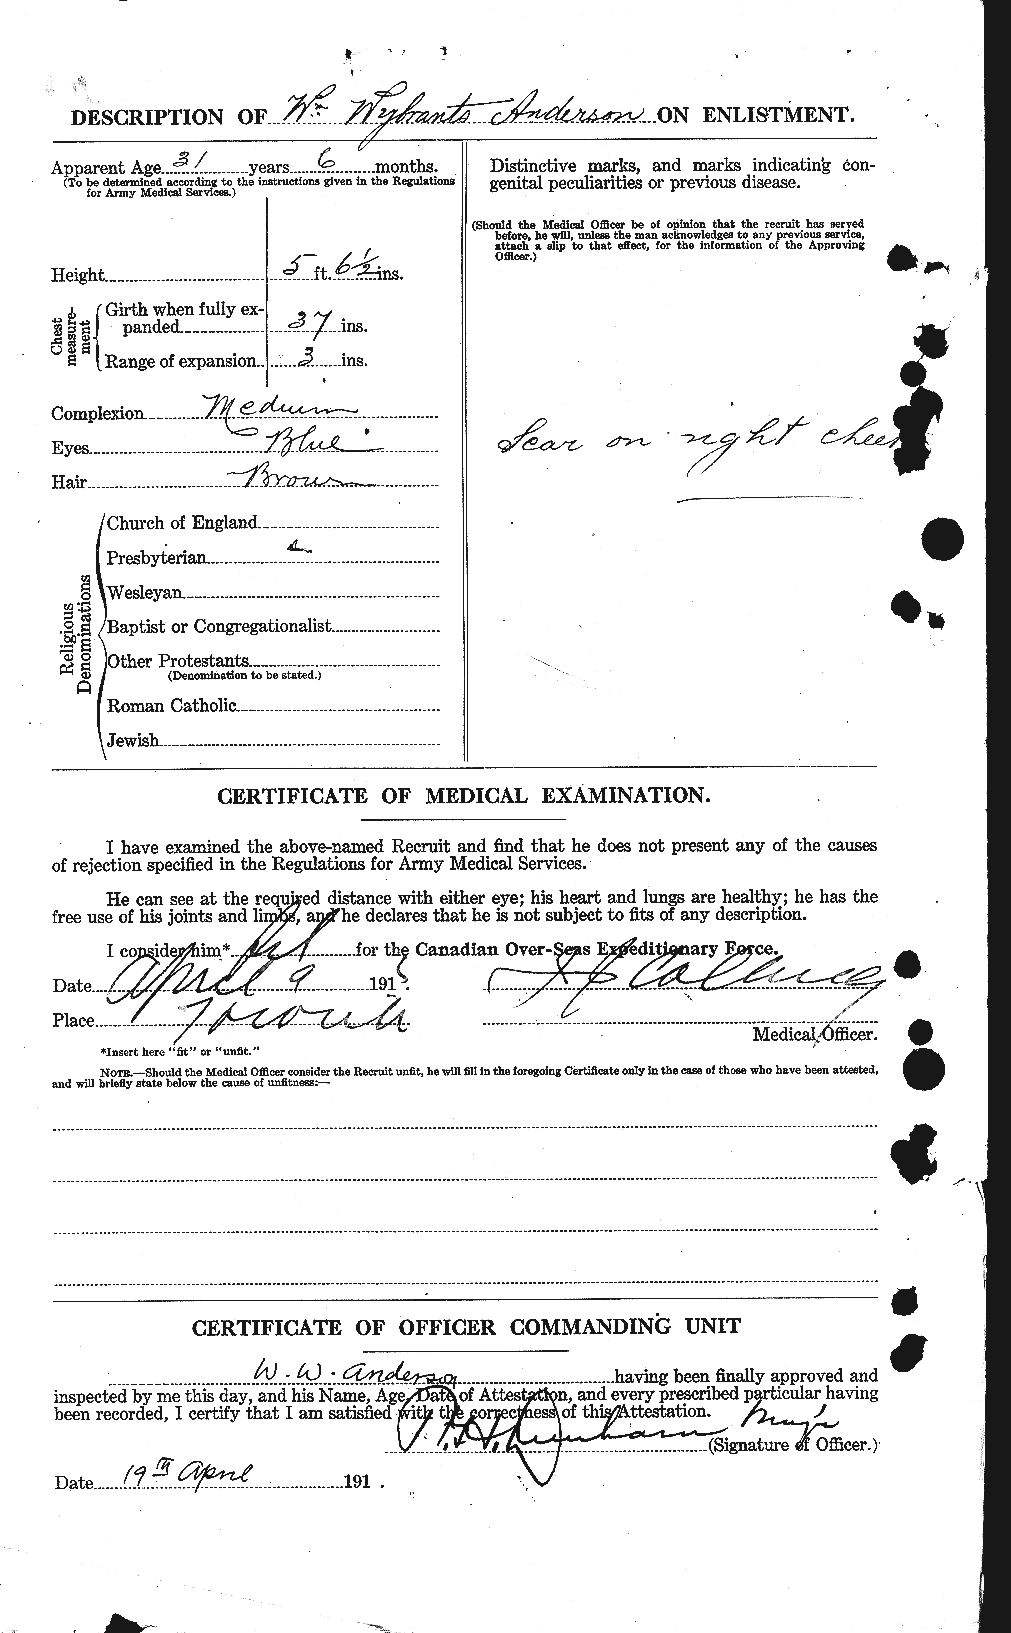 Personnel Records of the First World War - CEF 210667b